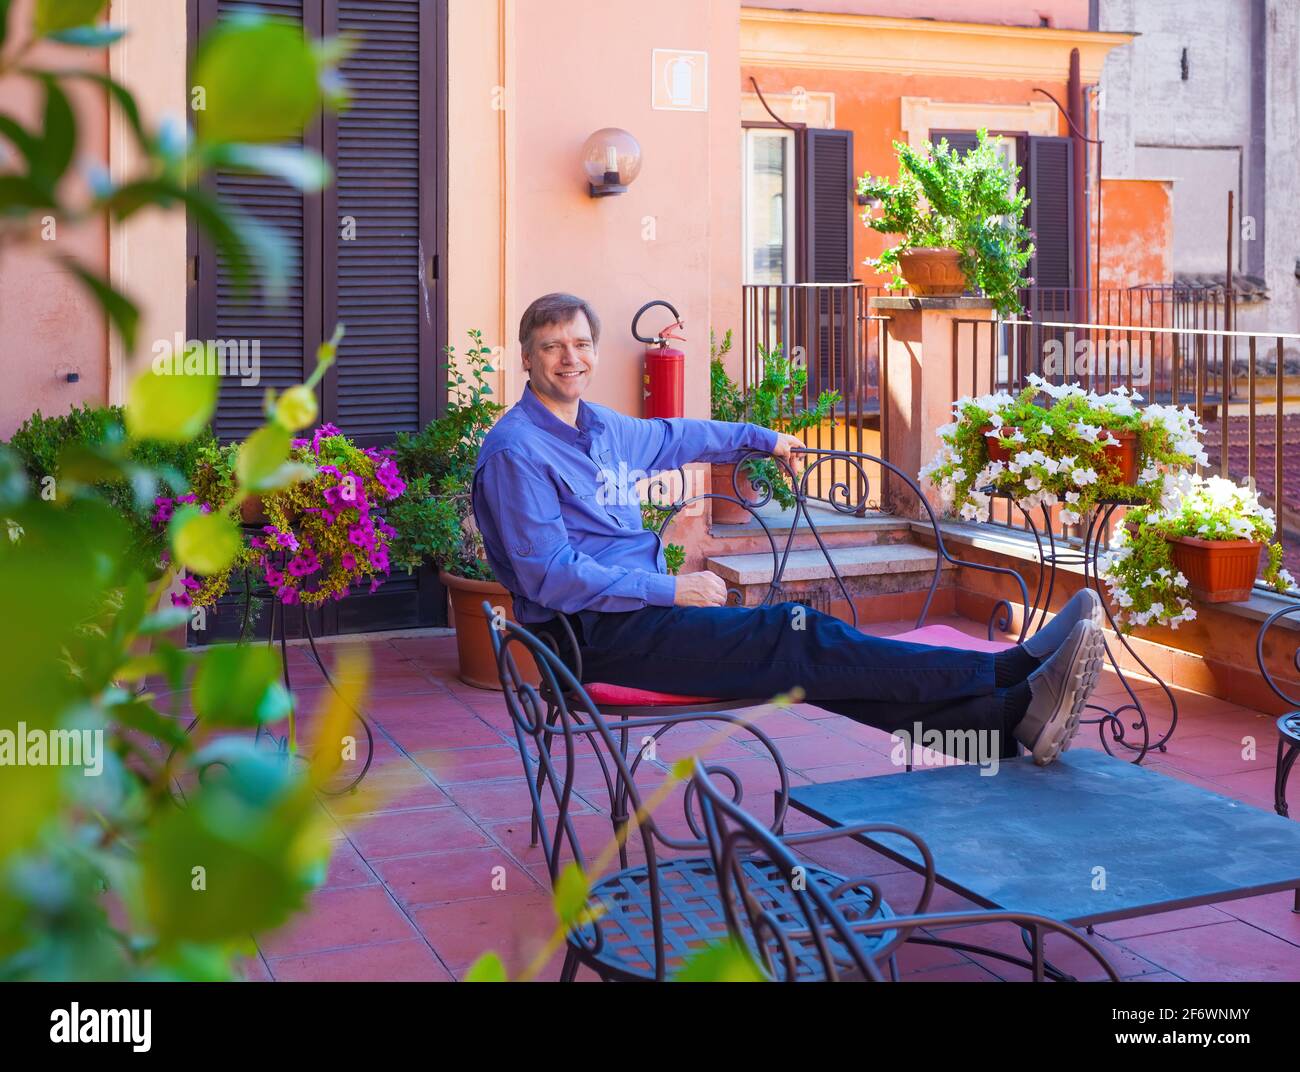 Smiling Caucasian man in forties resting on rooftop patio covered in red tiles in Italy Stock Photo